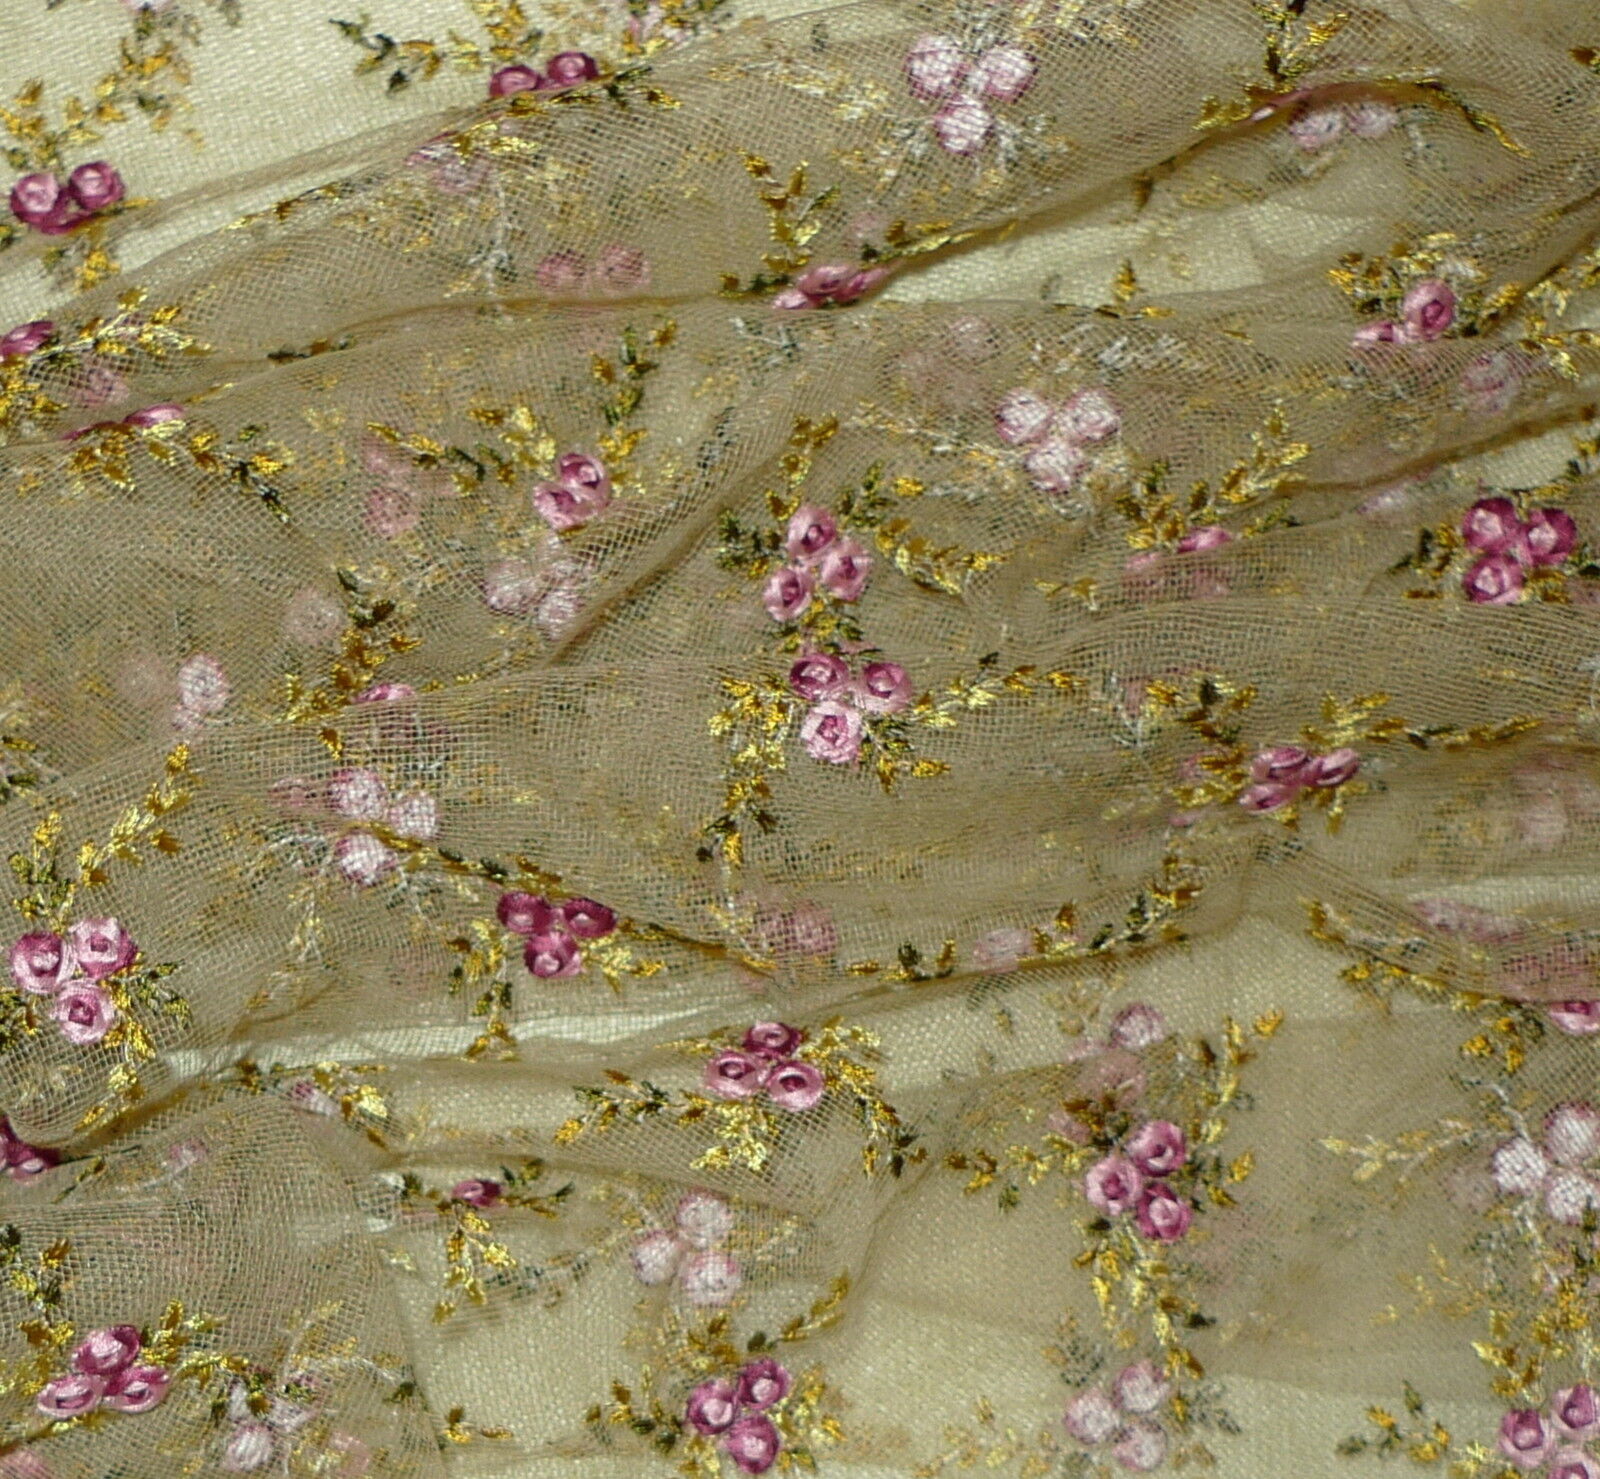 ROBERT ALLEN Floral Tulle Berry Pink Roses Embroidery 3 yard New